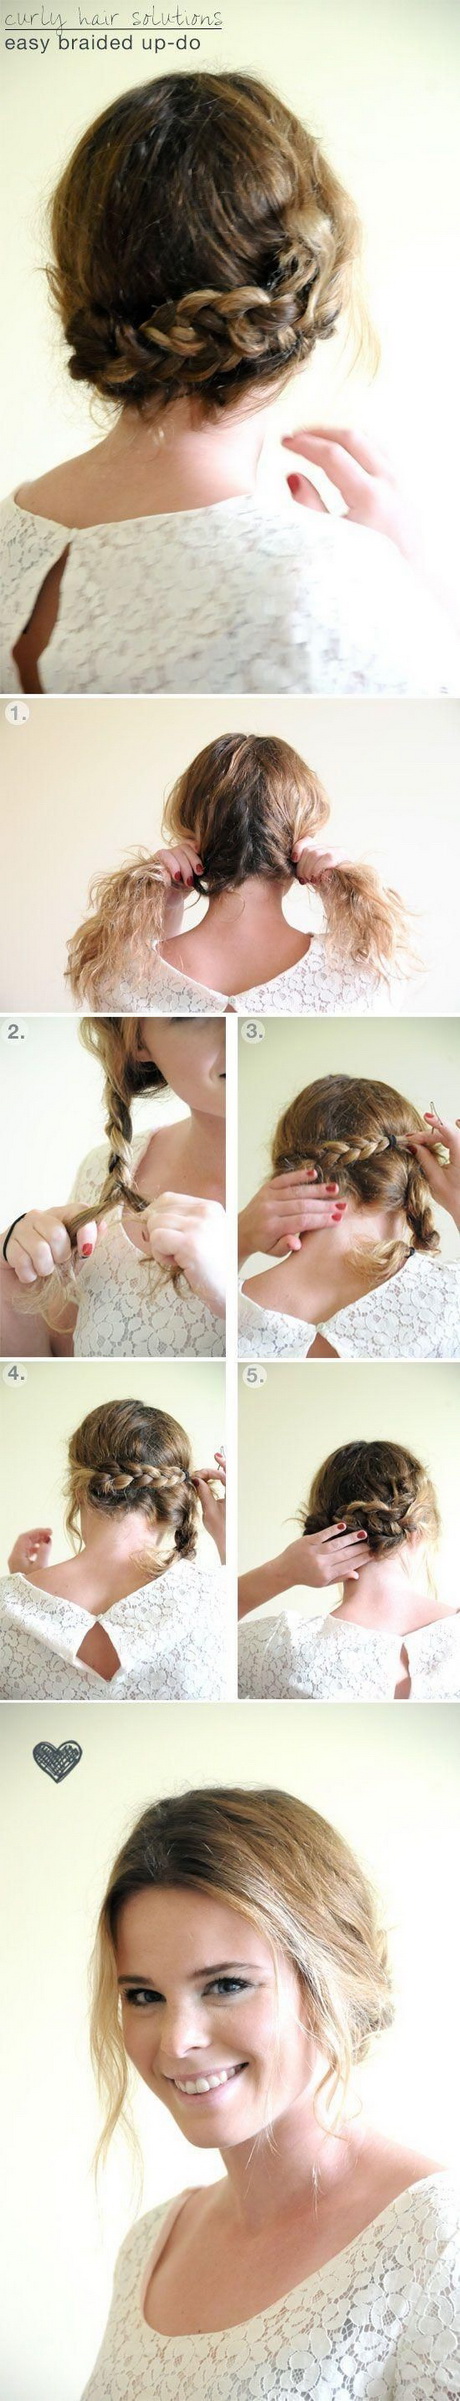 Easy updo hairstyles for long hair easy-updo-hairstyles-for-long-hair-74-9